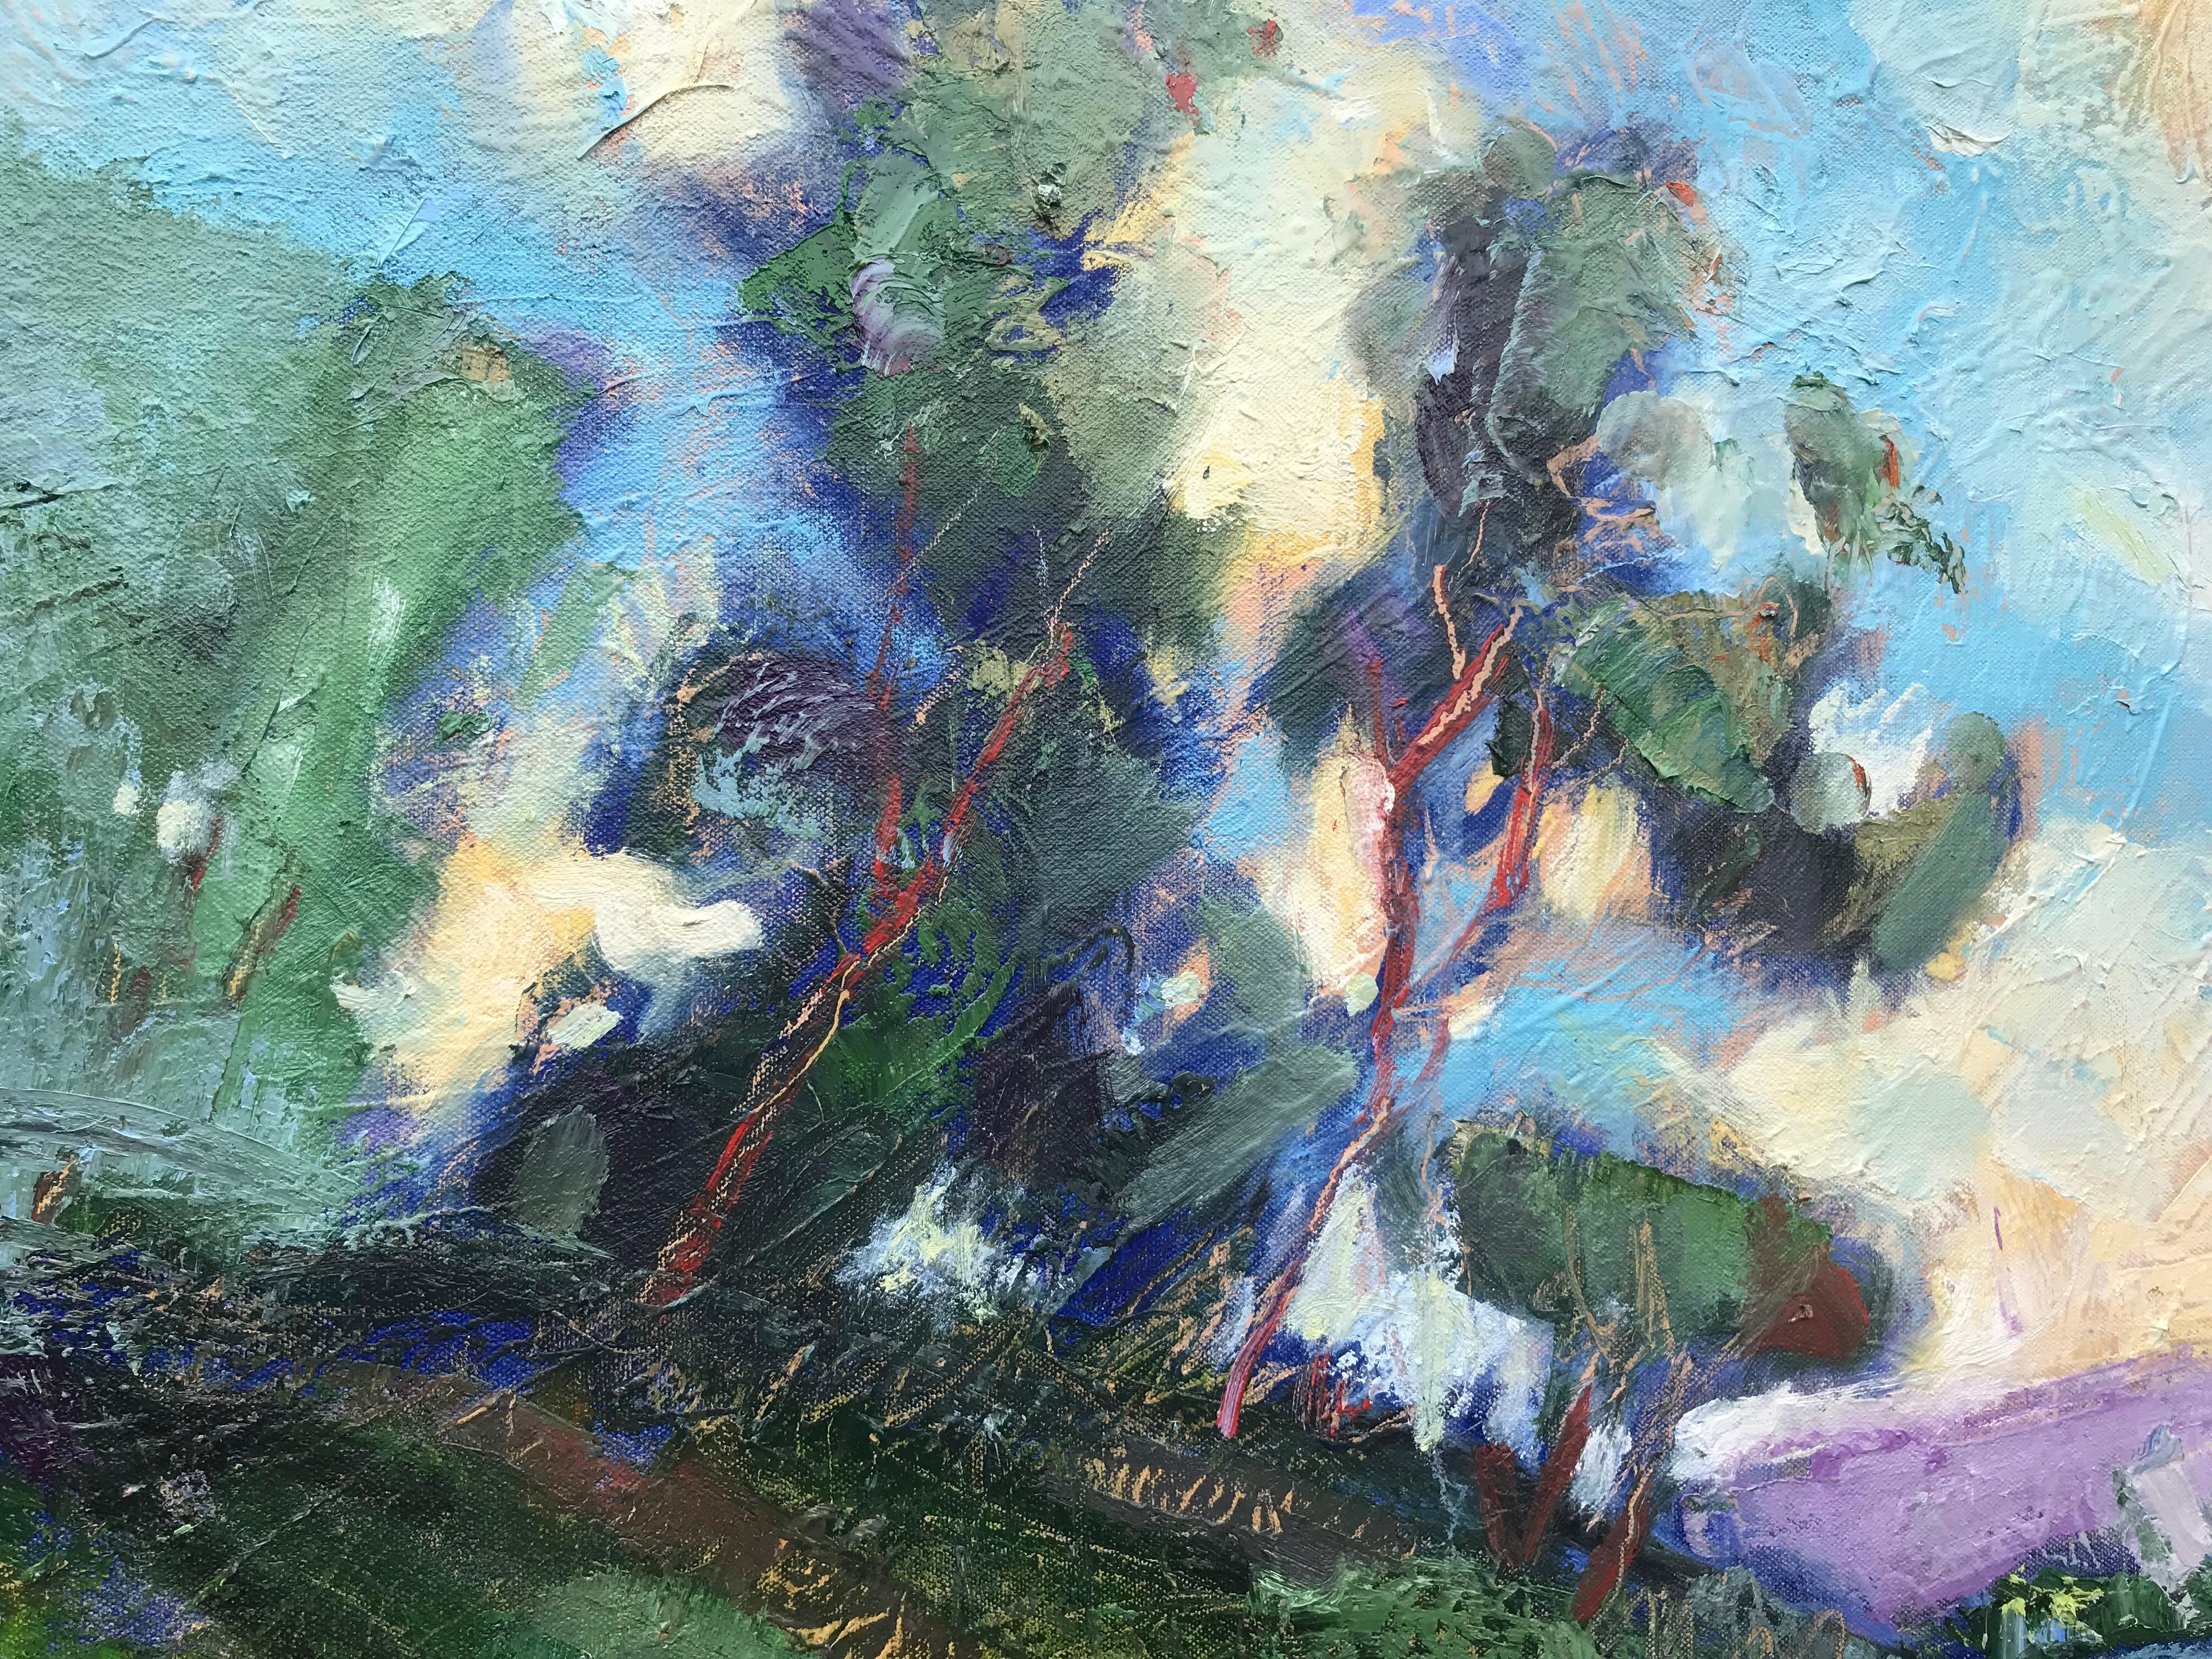 <p>Artist Comments<br />James Hartman methodically builds up the surface of his hand-stretched canvases. This landscape shows the efforts of carefully scraping back the oils, with new colors emerging from underneath. James based this painting off of